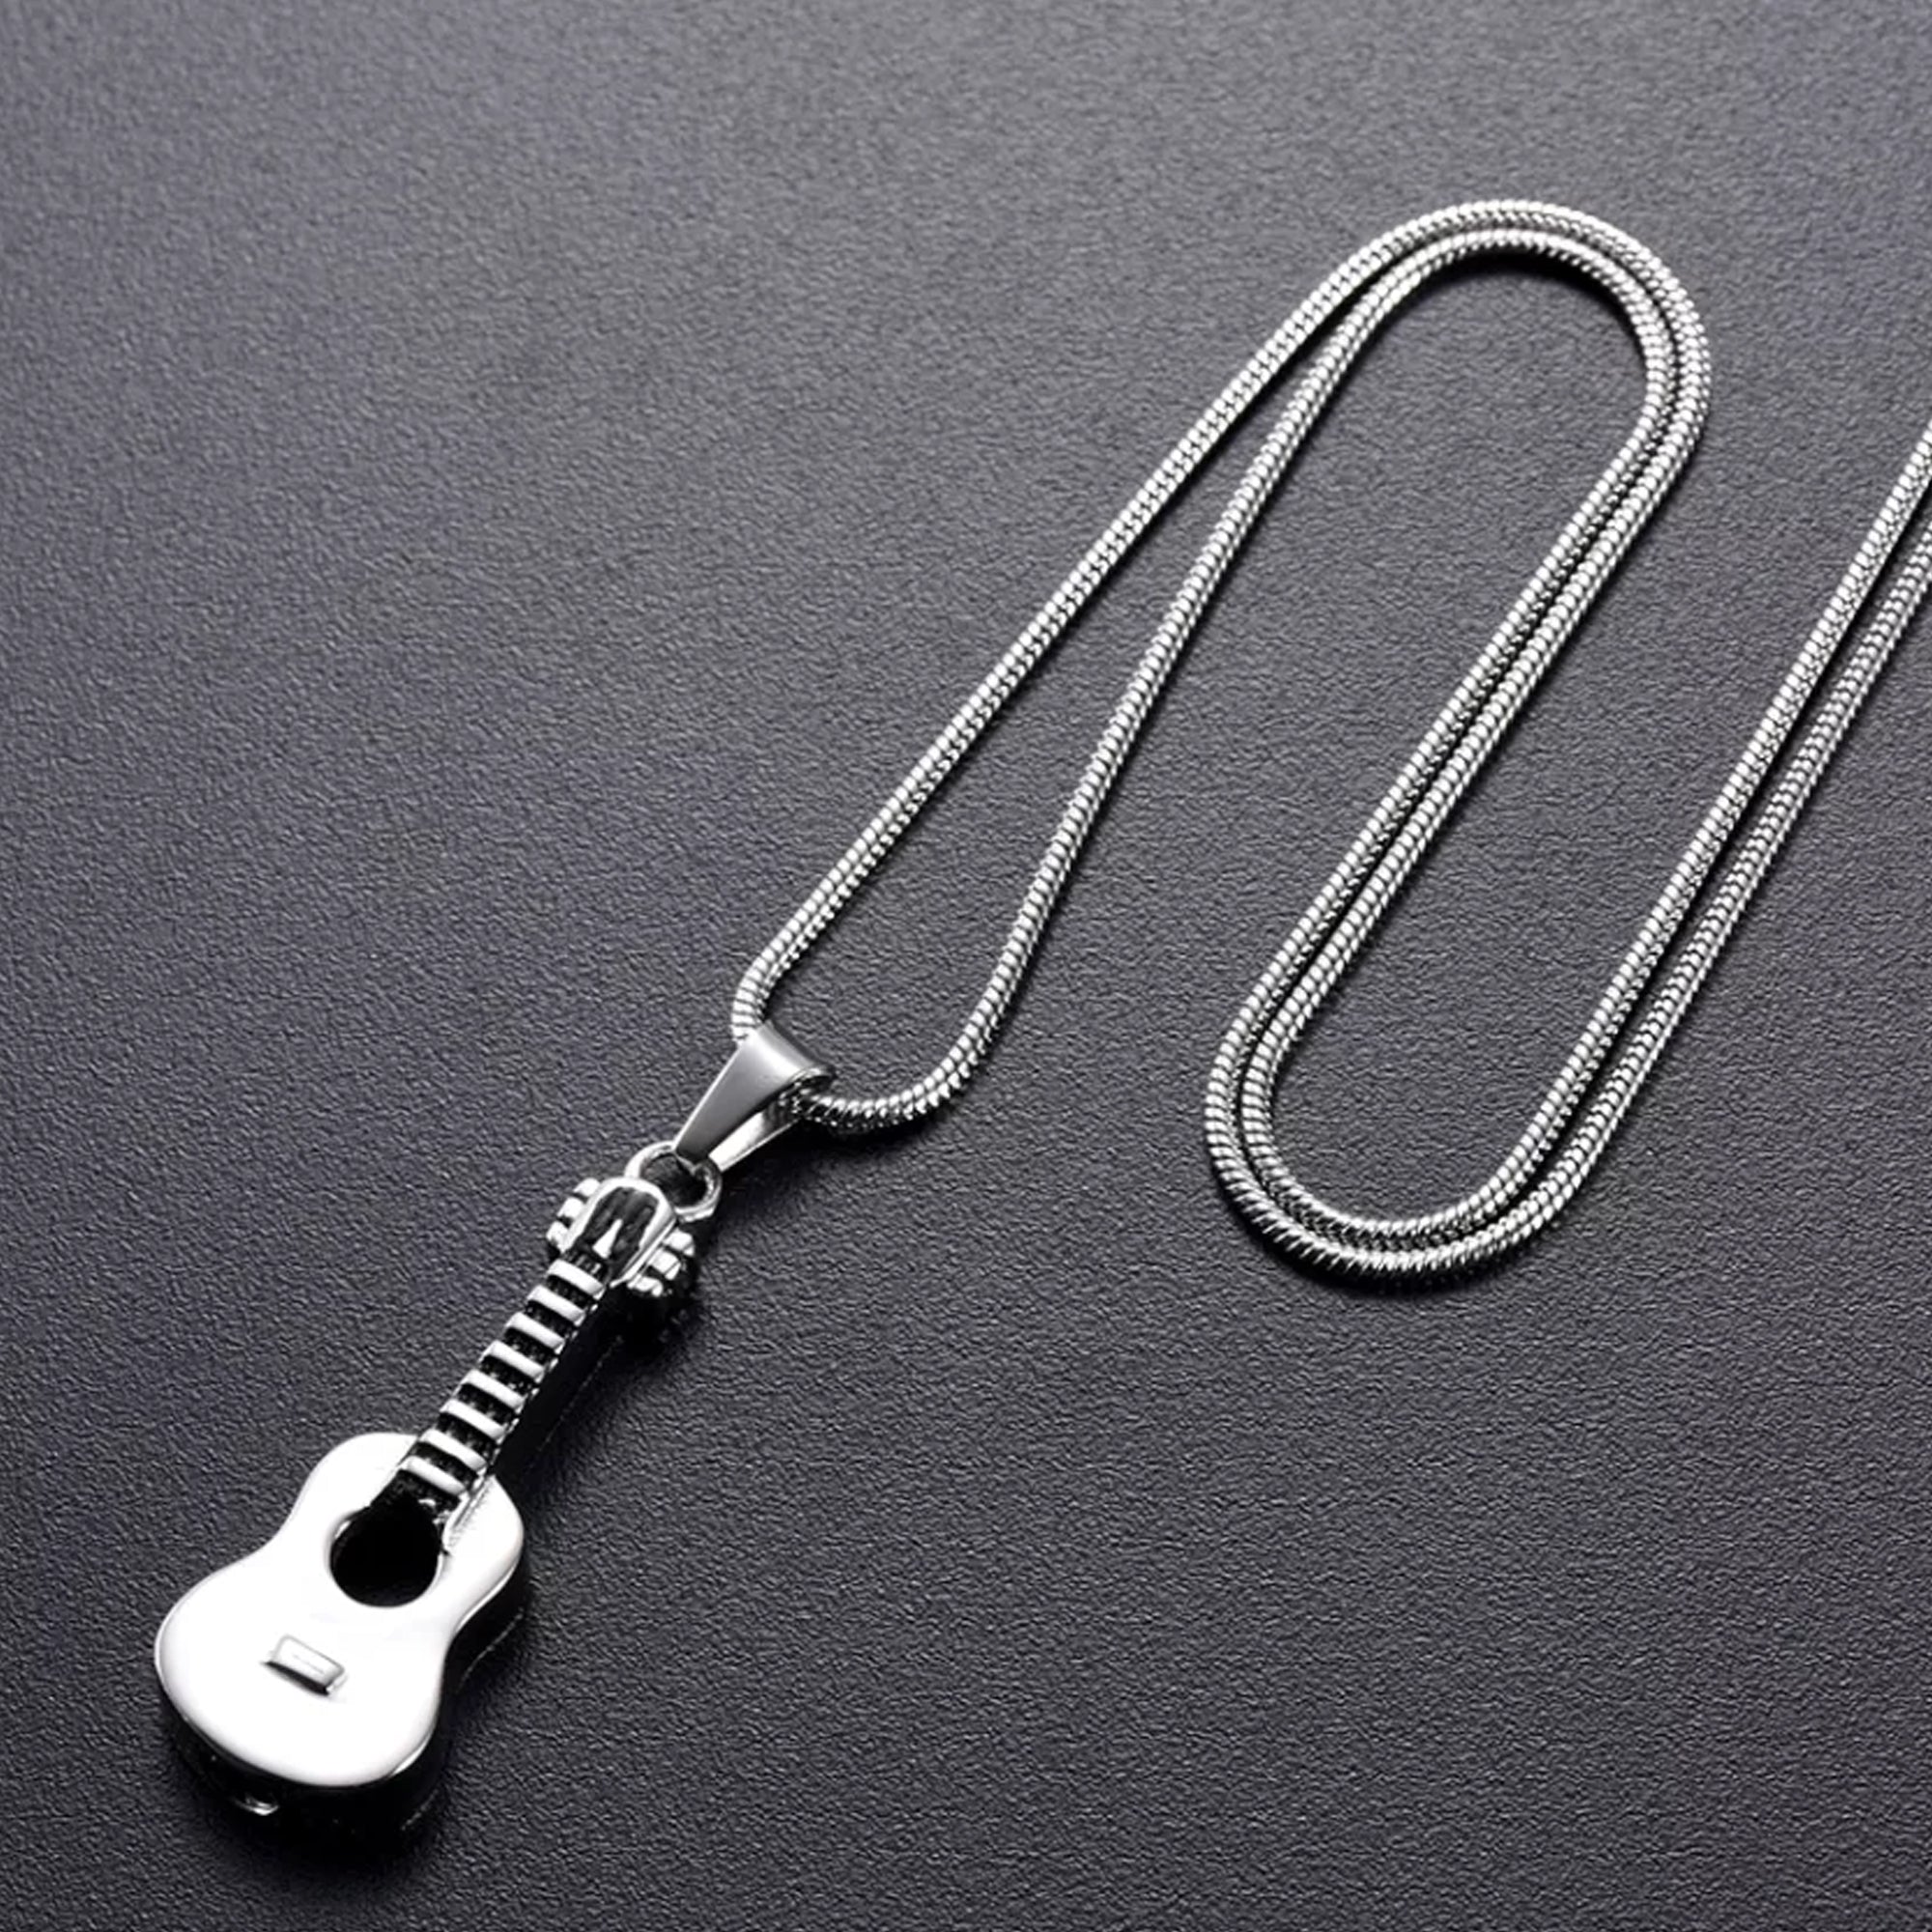 Buy Black Guitar Necklace Tribute to a Guitarist Unique Fashion Jewelry  Chain Choice Online in India - Etsy